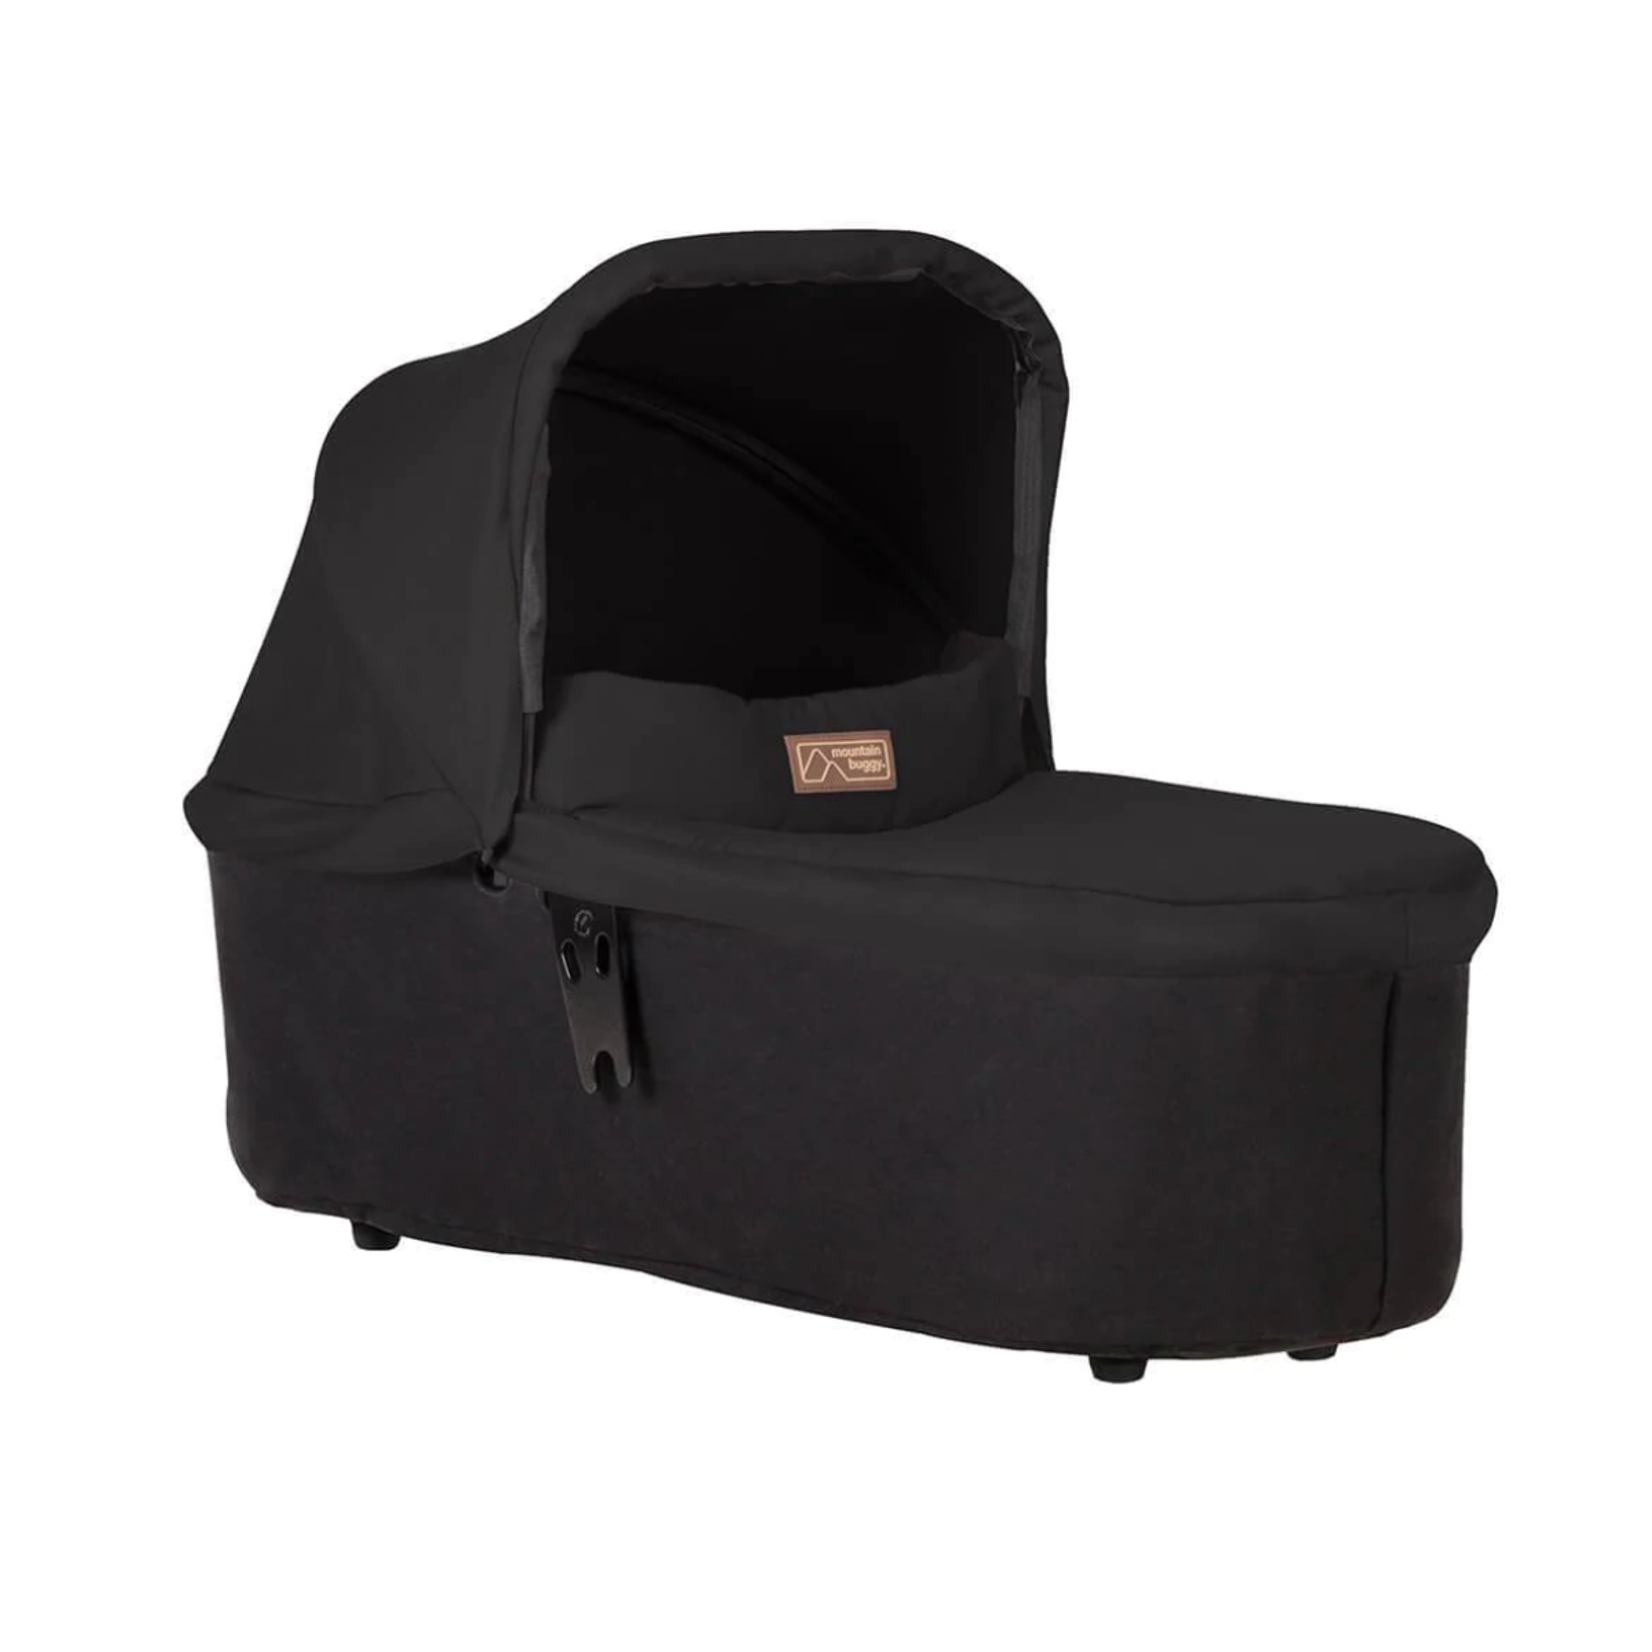 Mountain Buggy Carrycot plus for swift™ and MB mini